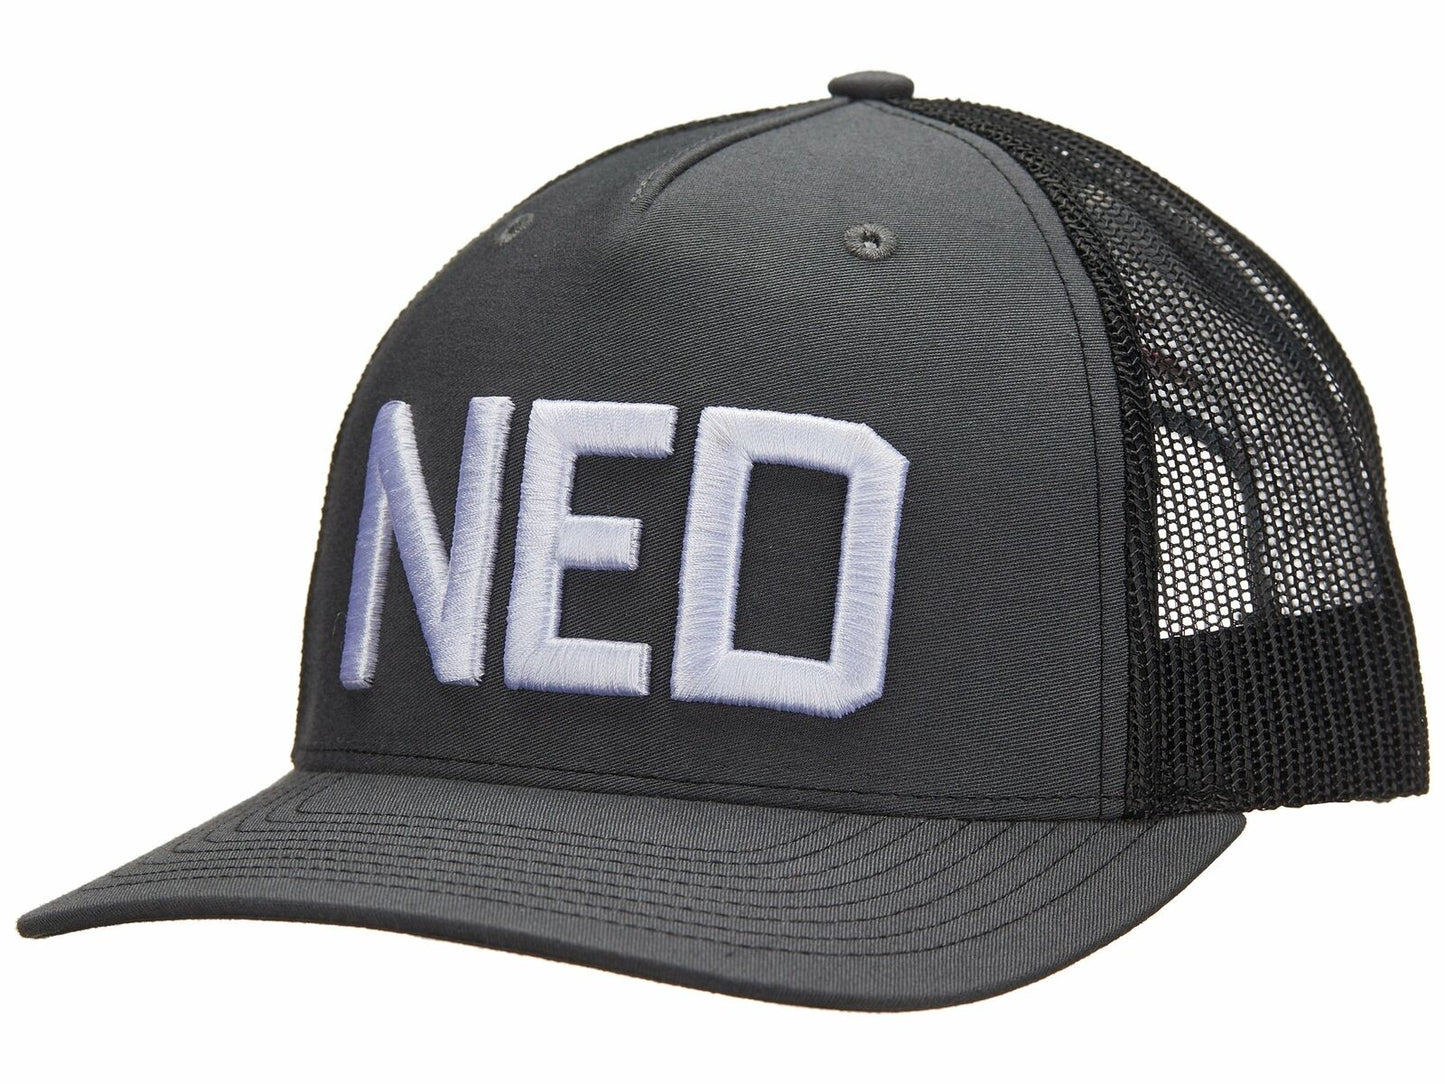 Z-Man NED Embroidered Trucker Hats